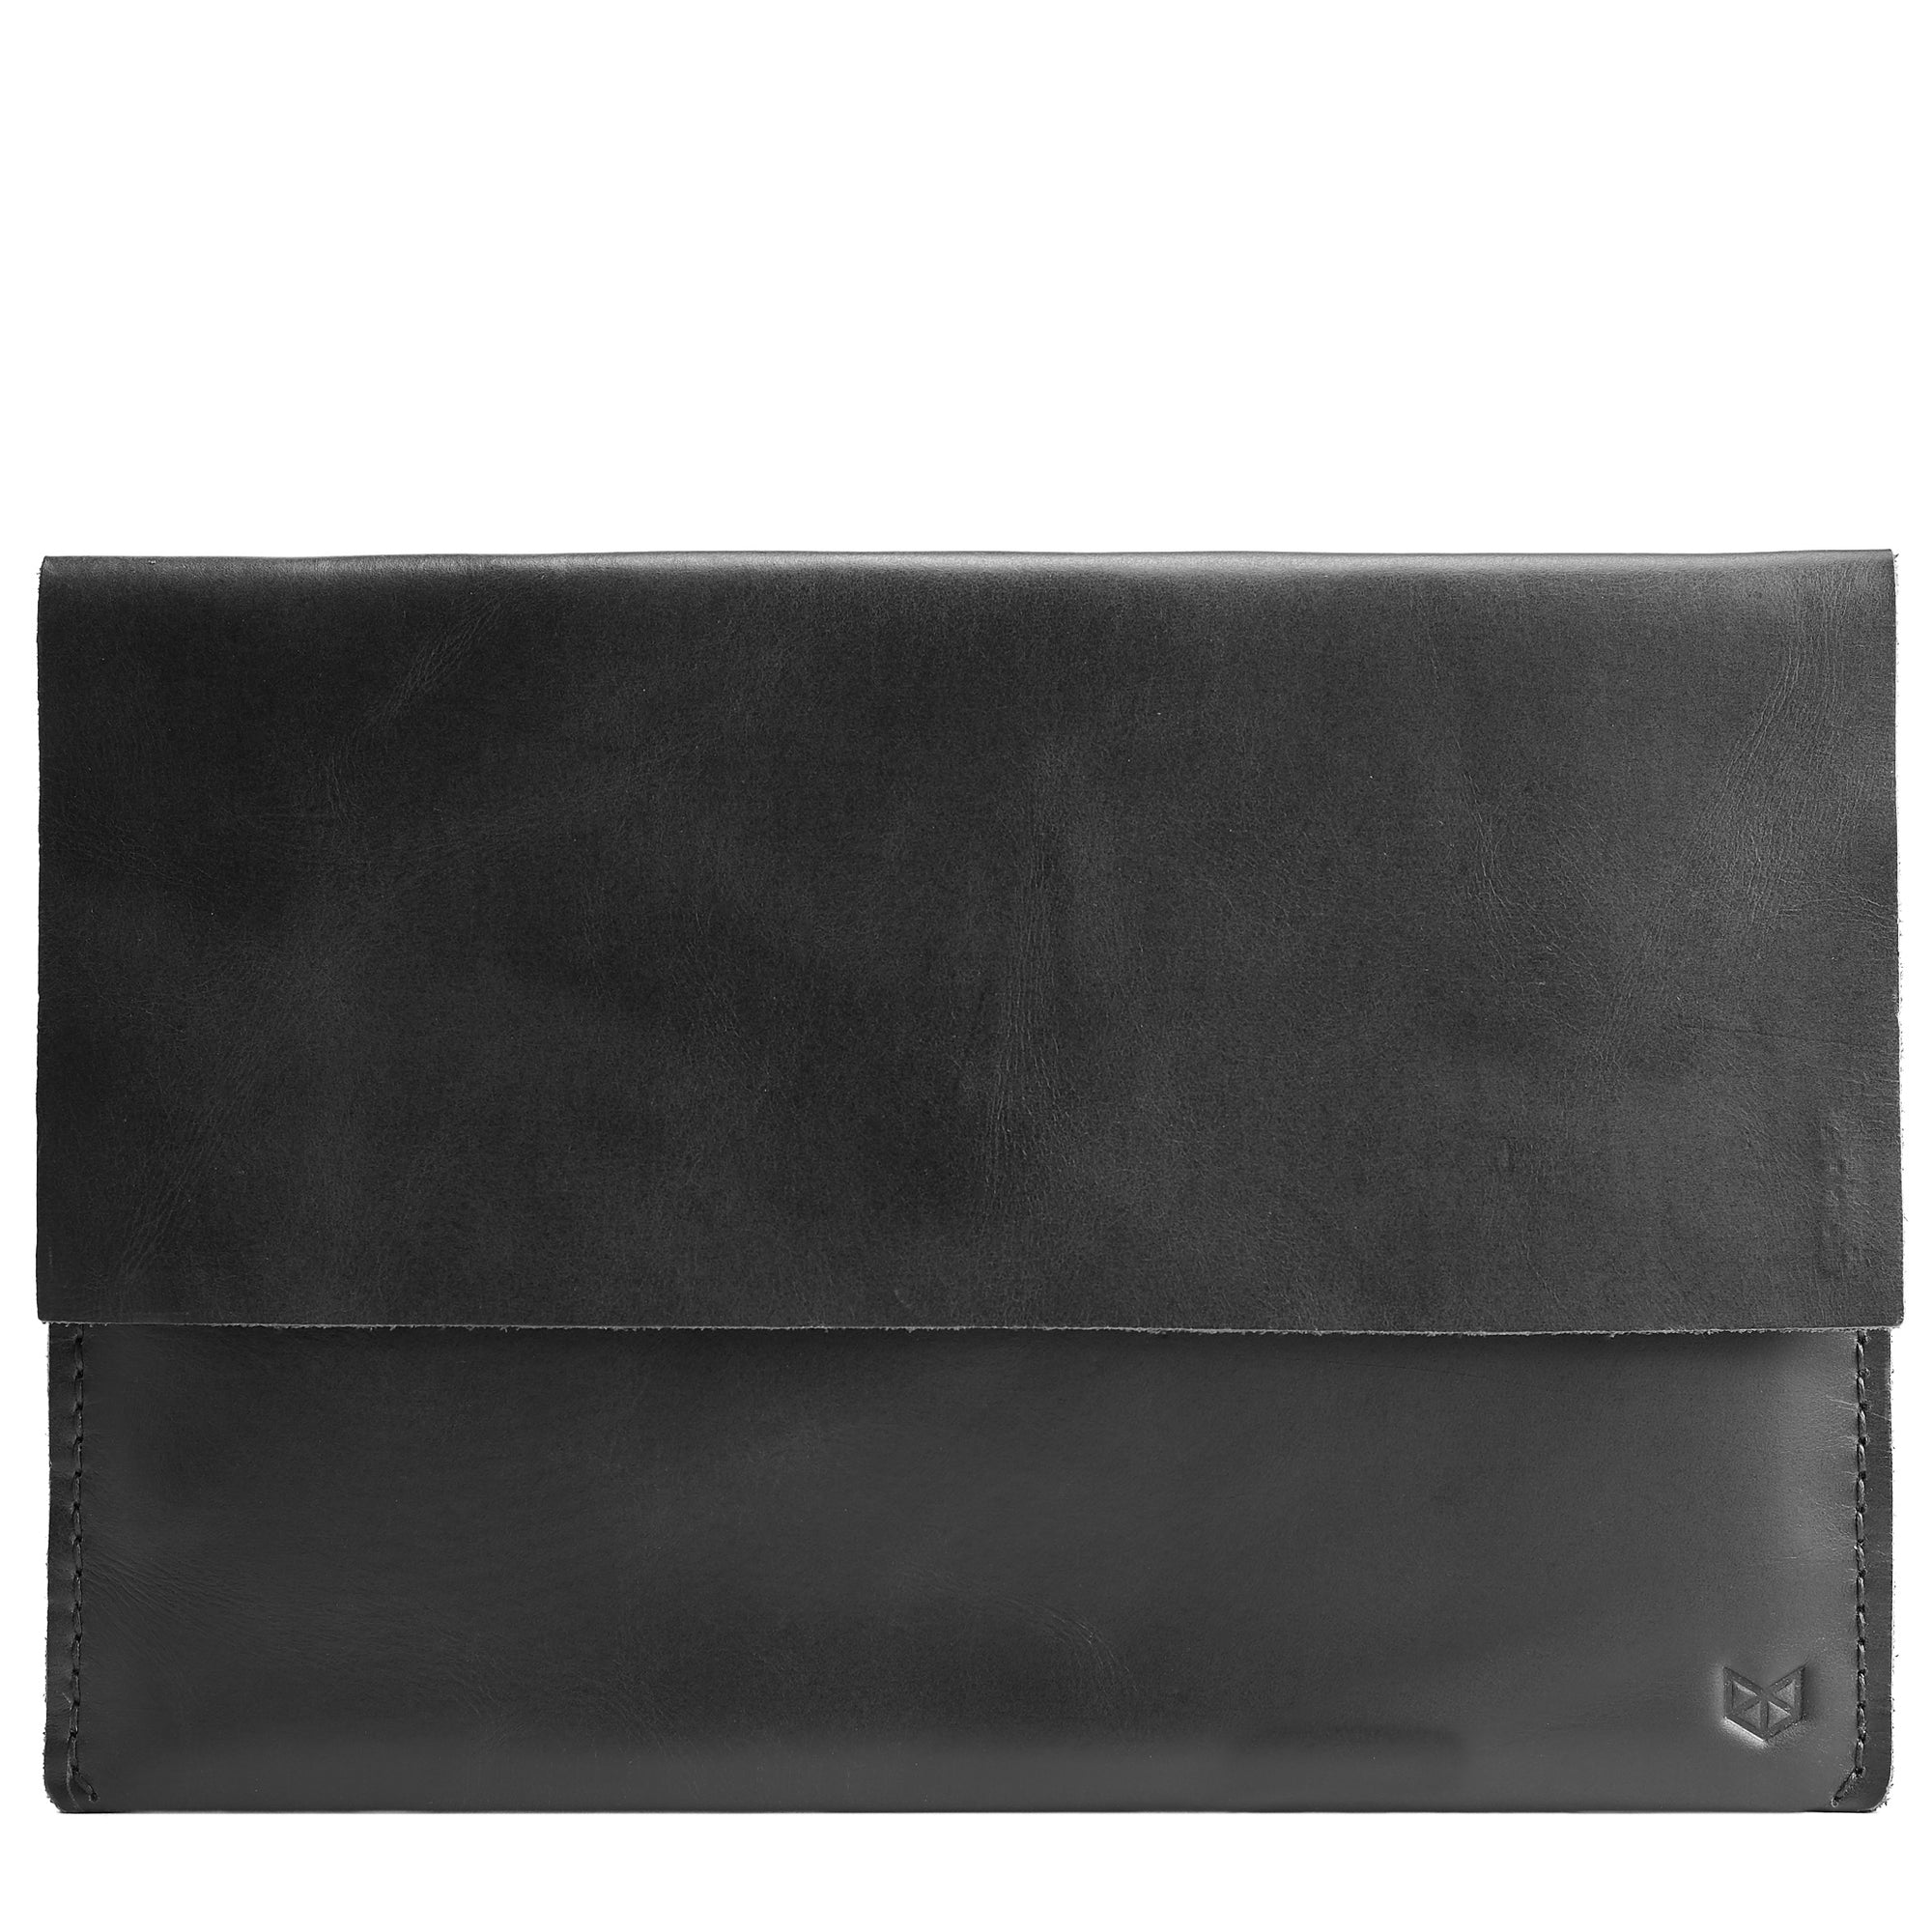 Cover. Black Leather Minial iPad Sleeve Case by Capra Leather